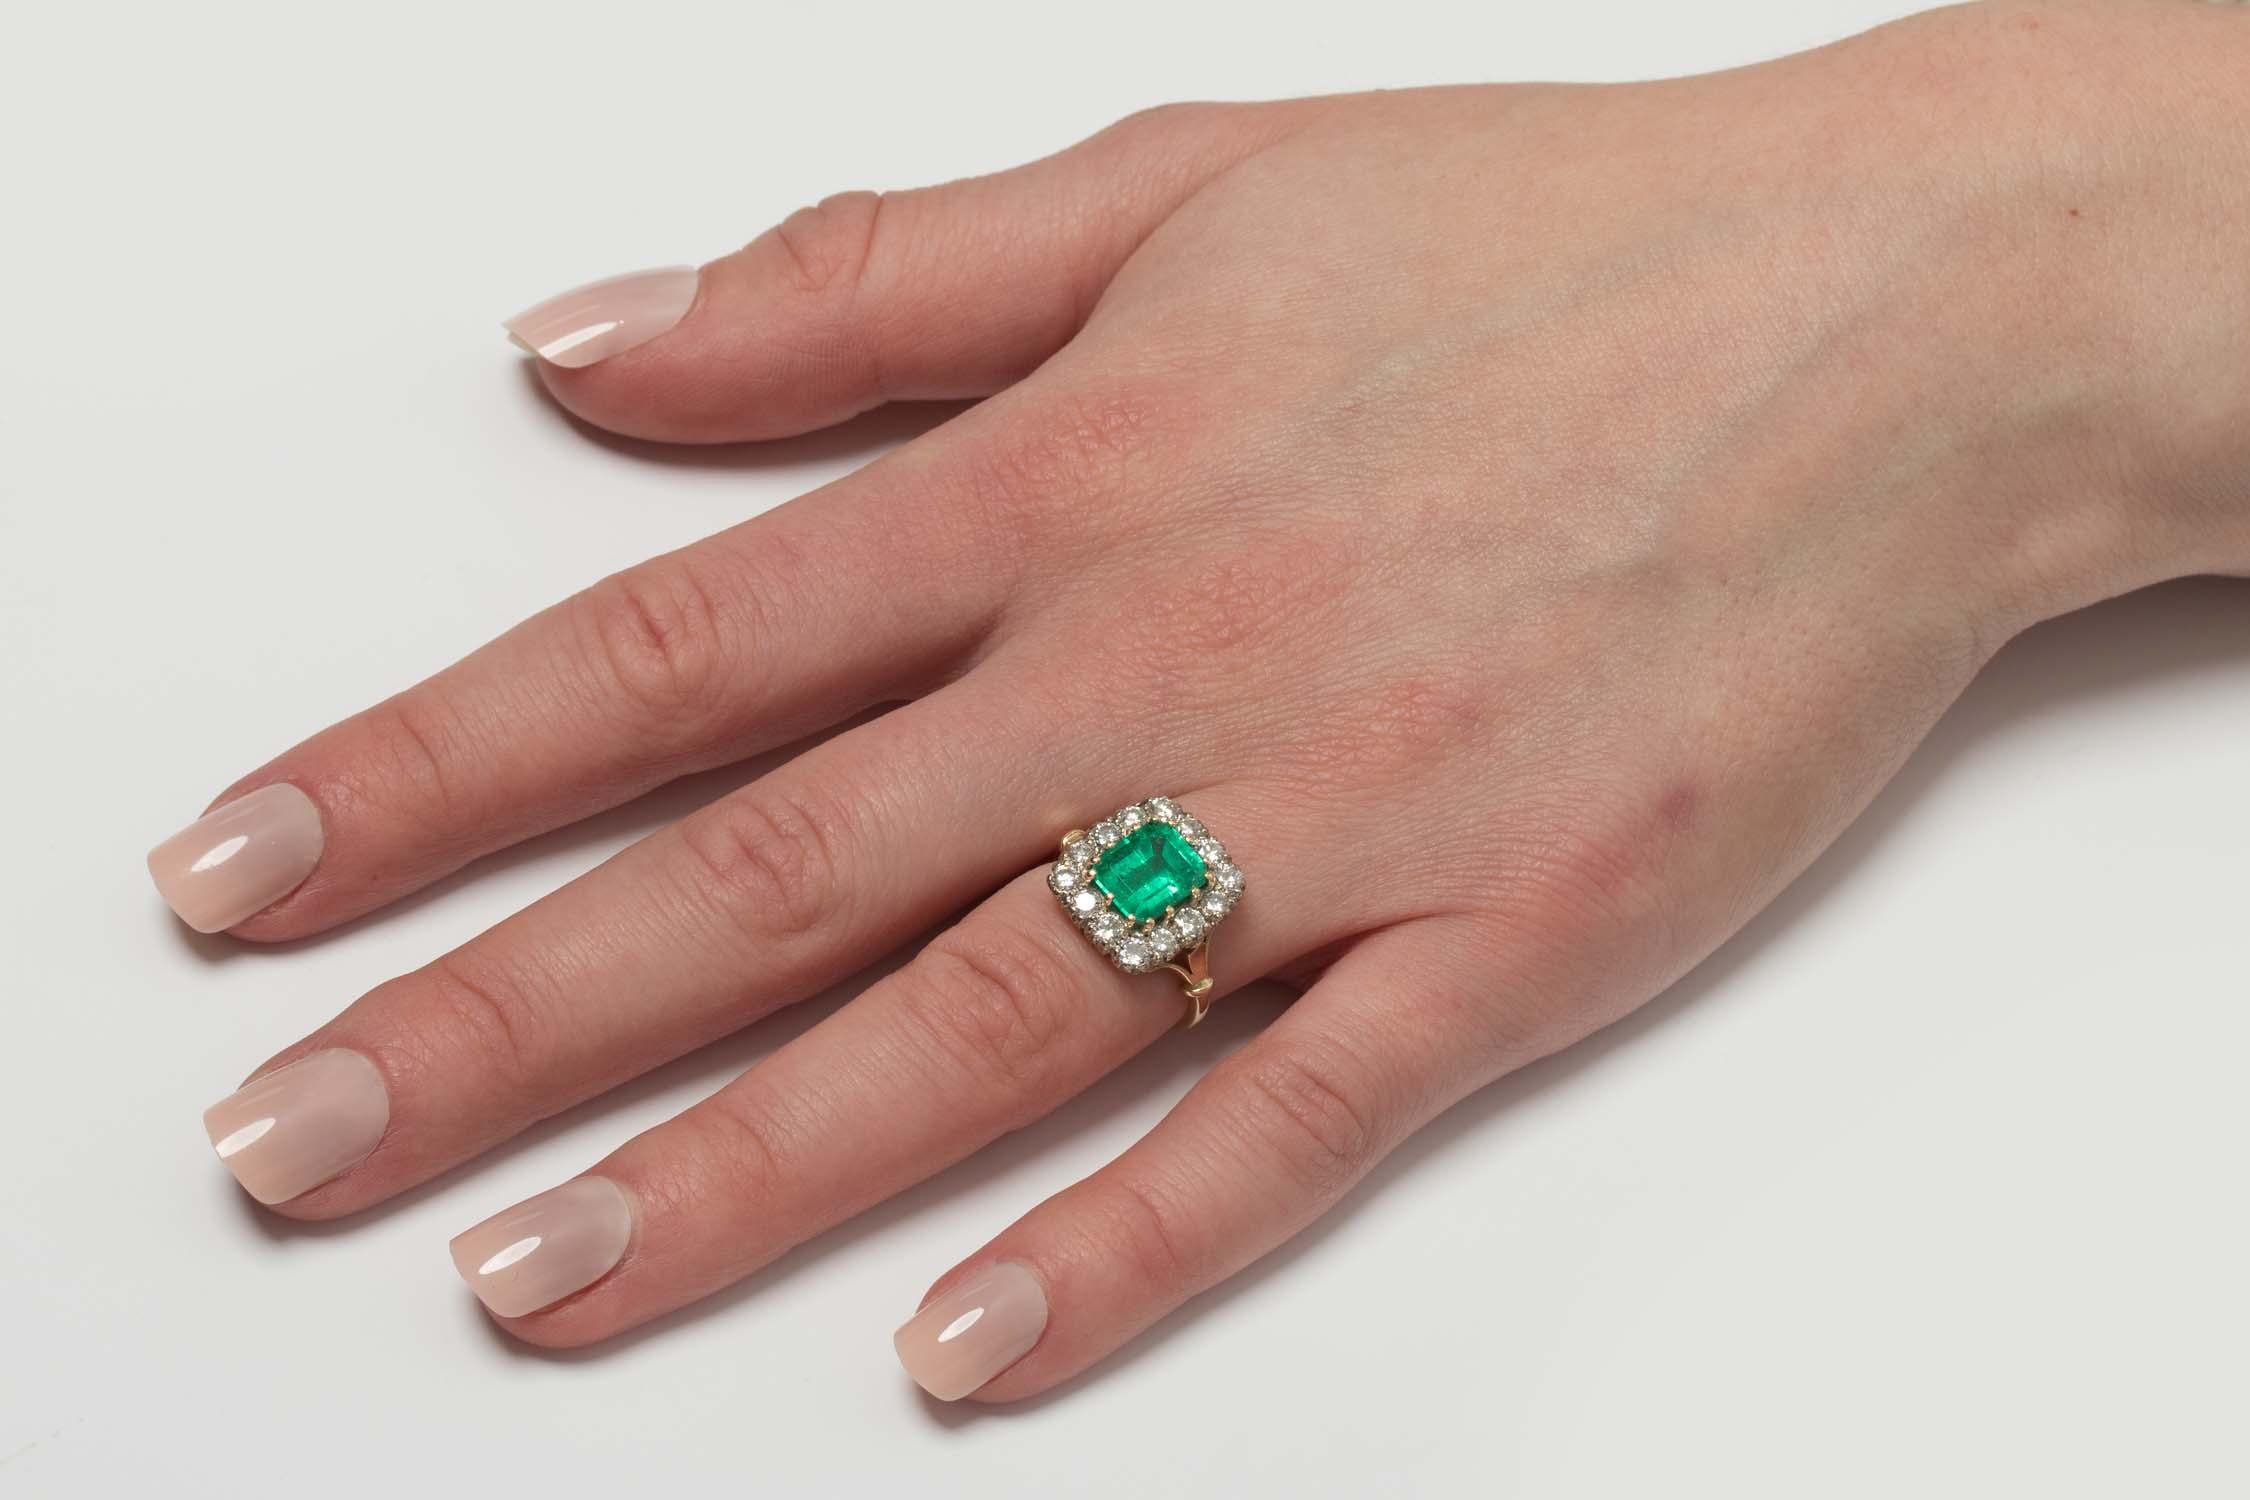 Vintage 2.60 Carat Emerald and Diamond Cluster Ring, circa 1970s For Sale 1